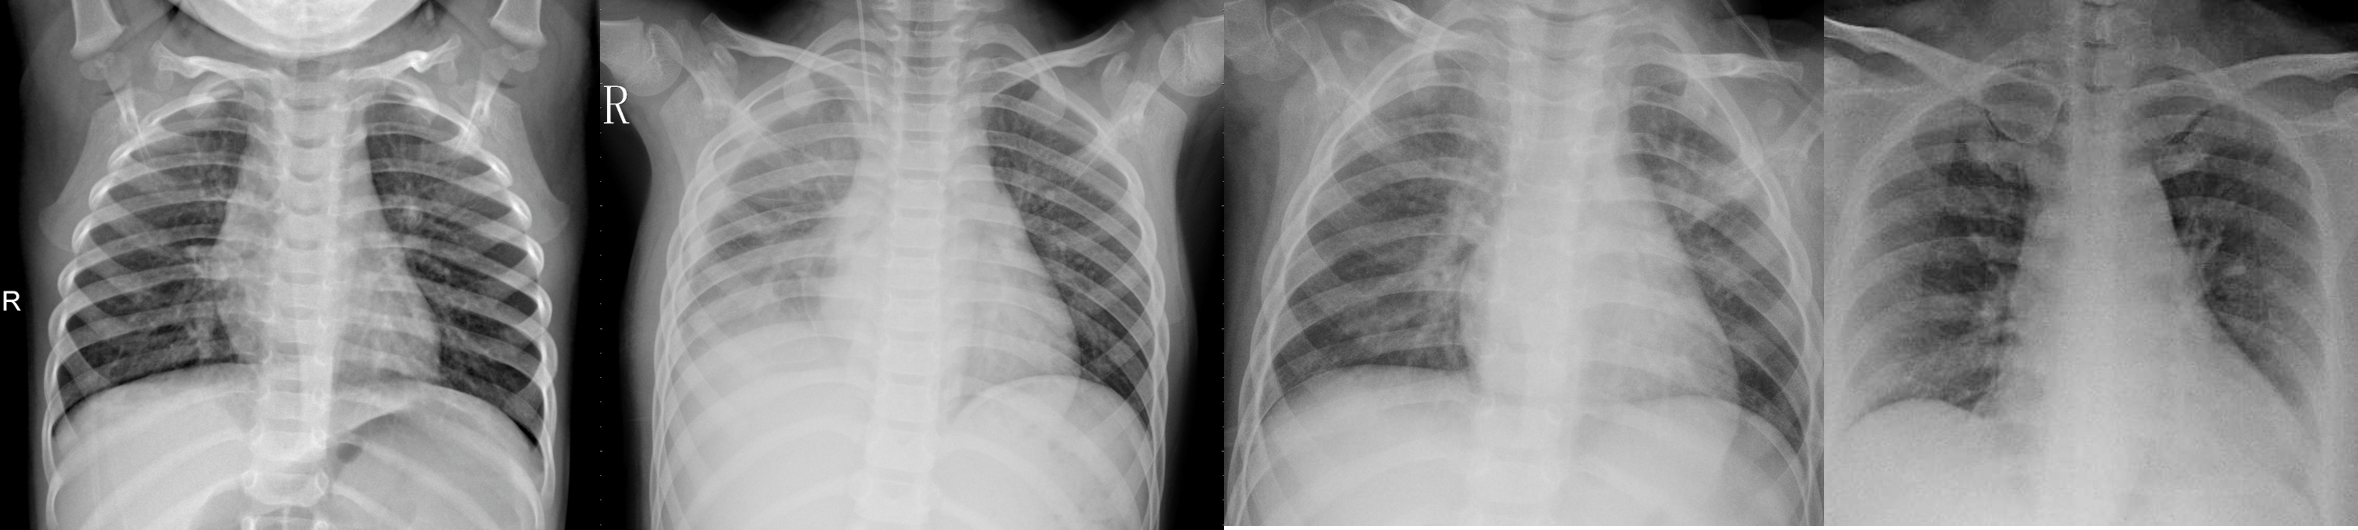 Detecting Covid 19 Induced Pneumonia From Chest X Rays With Transfer Learning An Implementation In Tensorflow And